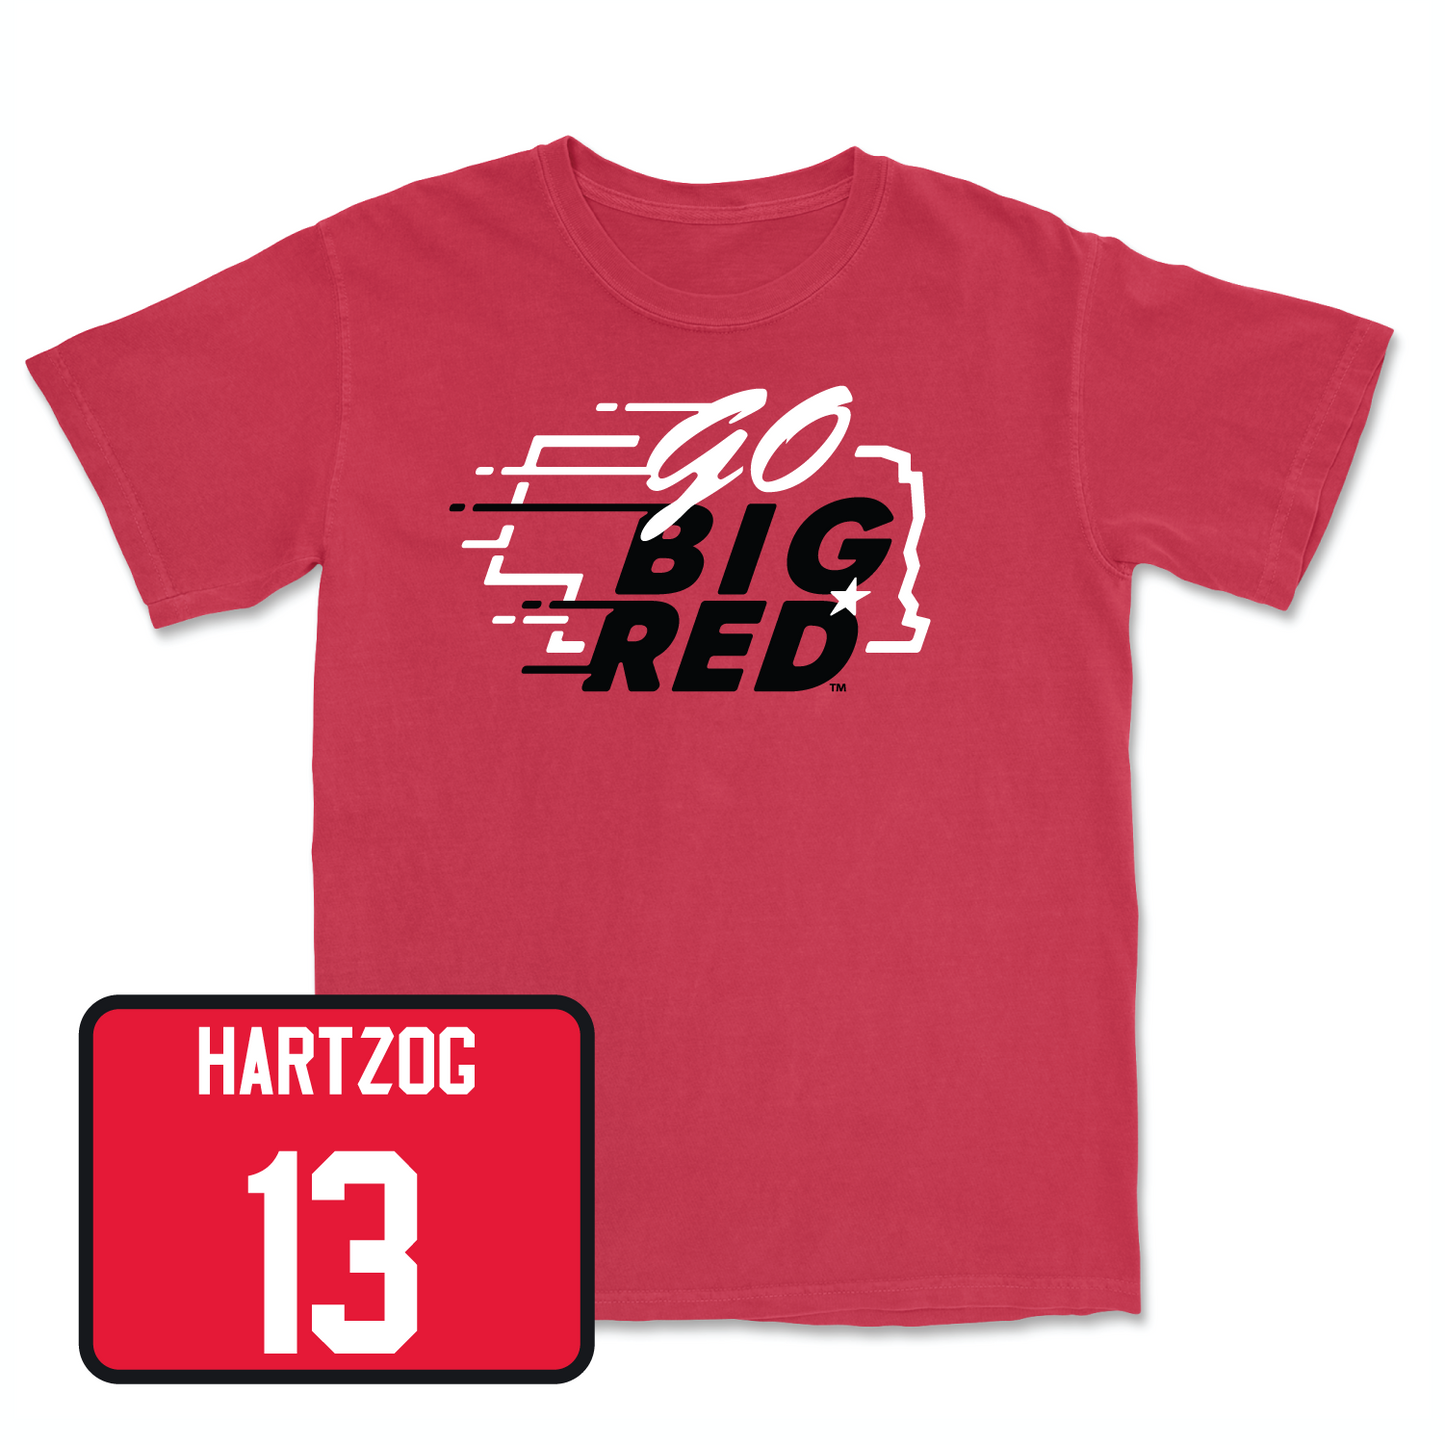 Red Football GBR Tee 2 4X-Large / Malcolm Hartzog | #13